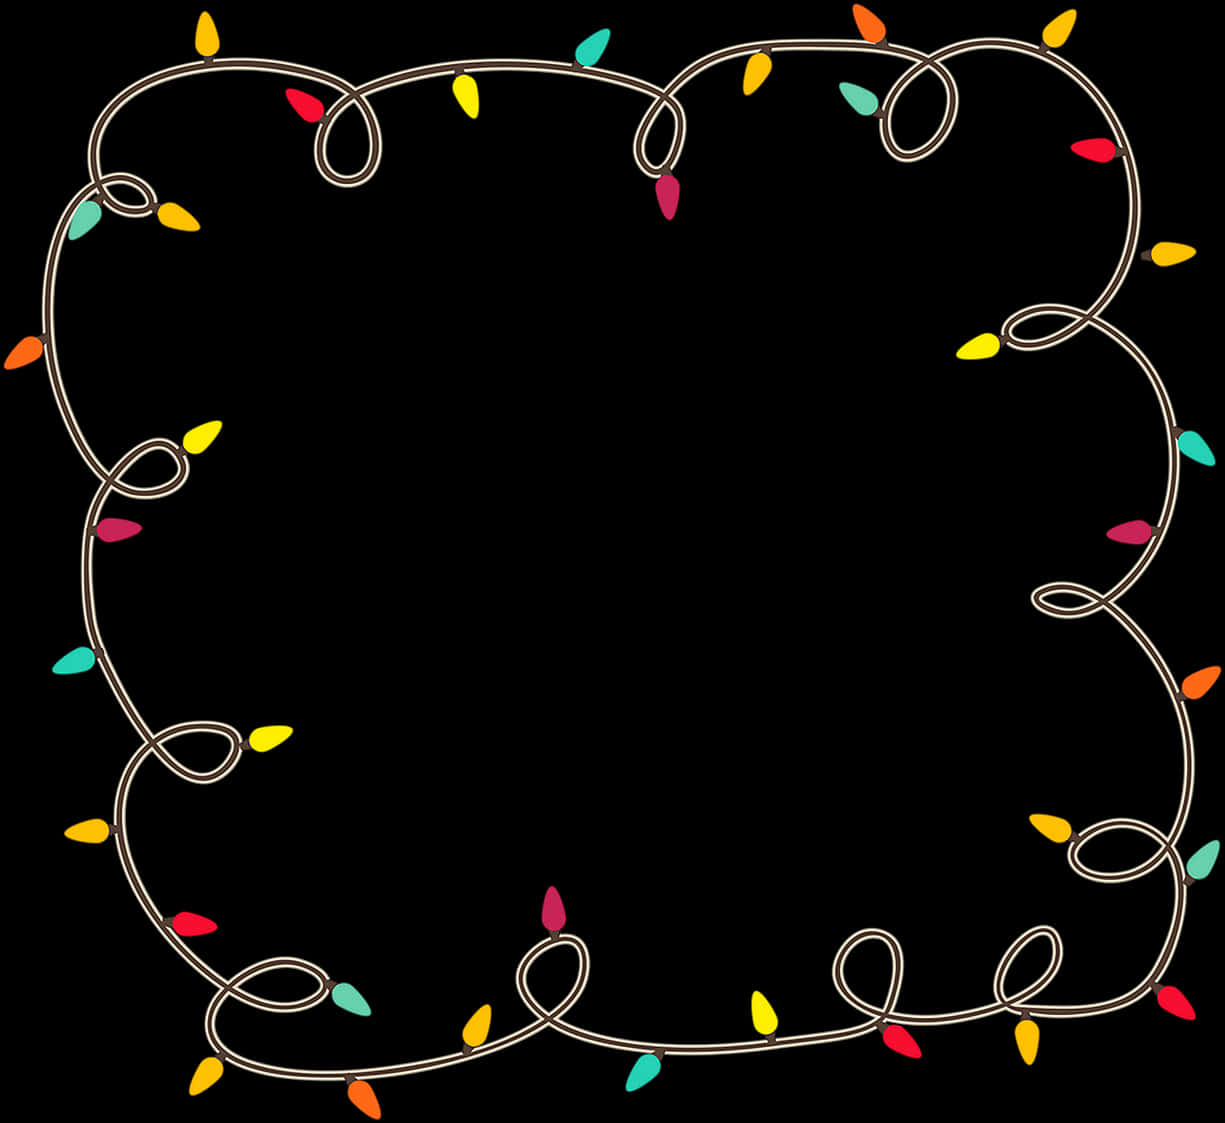 A String Of Lights On A Black Background